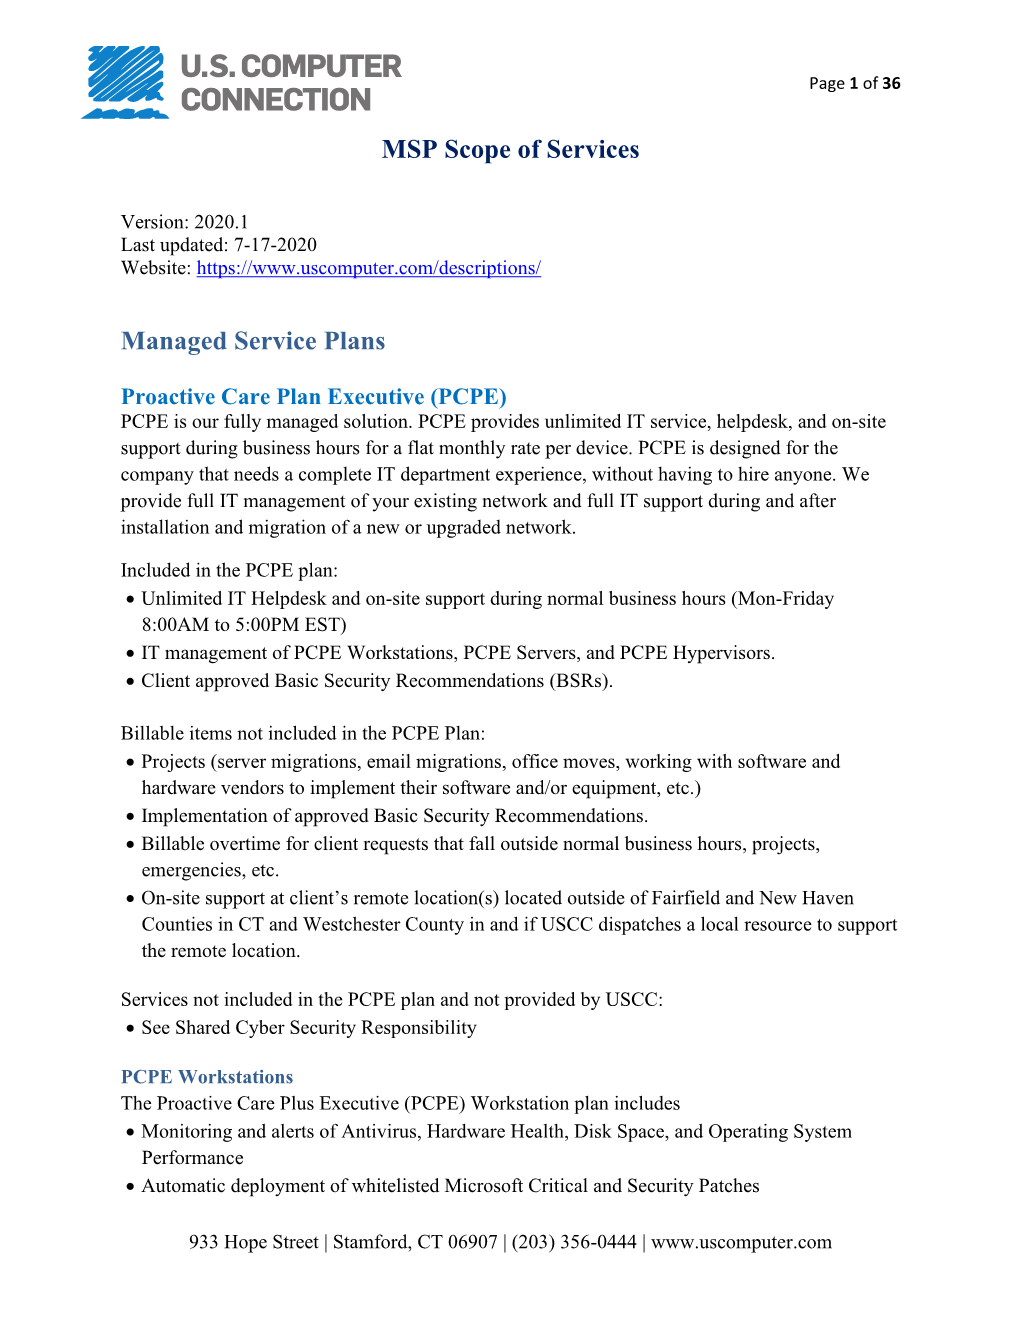 MSP Scope of Services Managed Service Plans